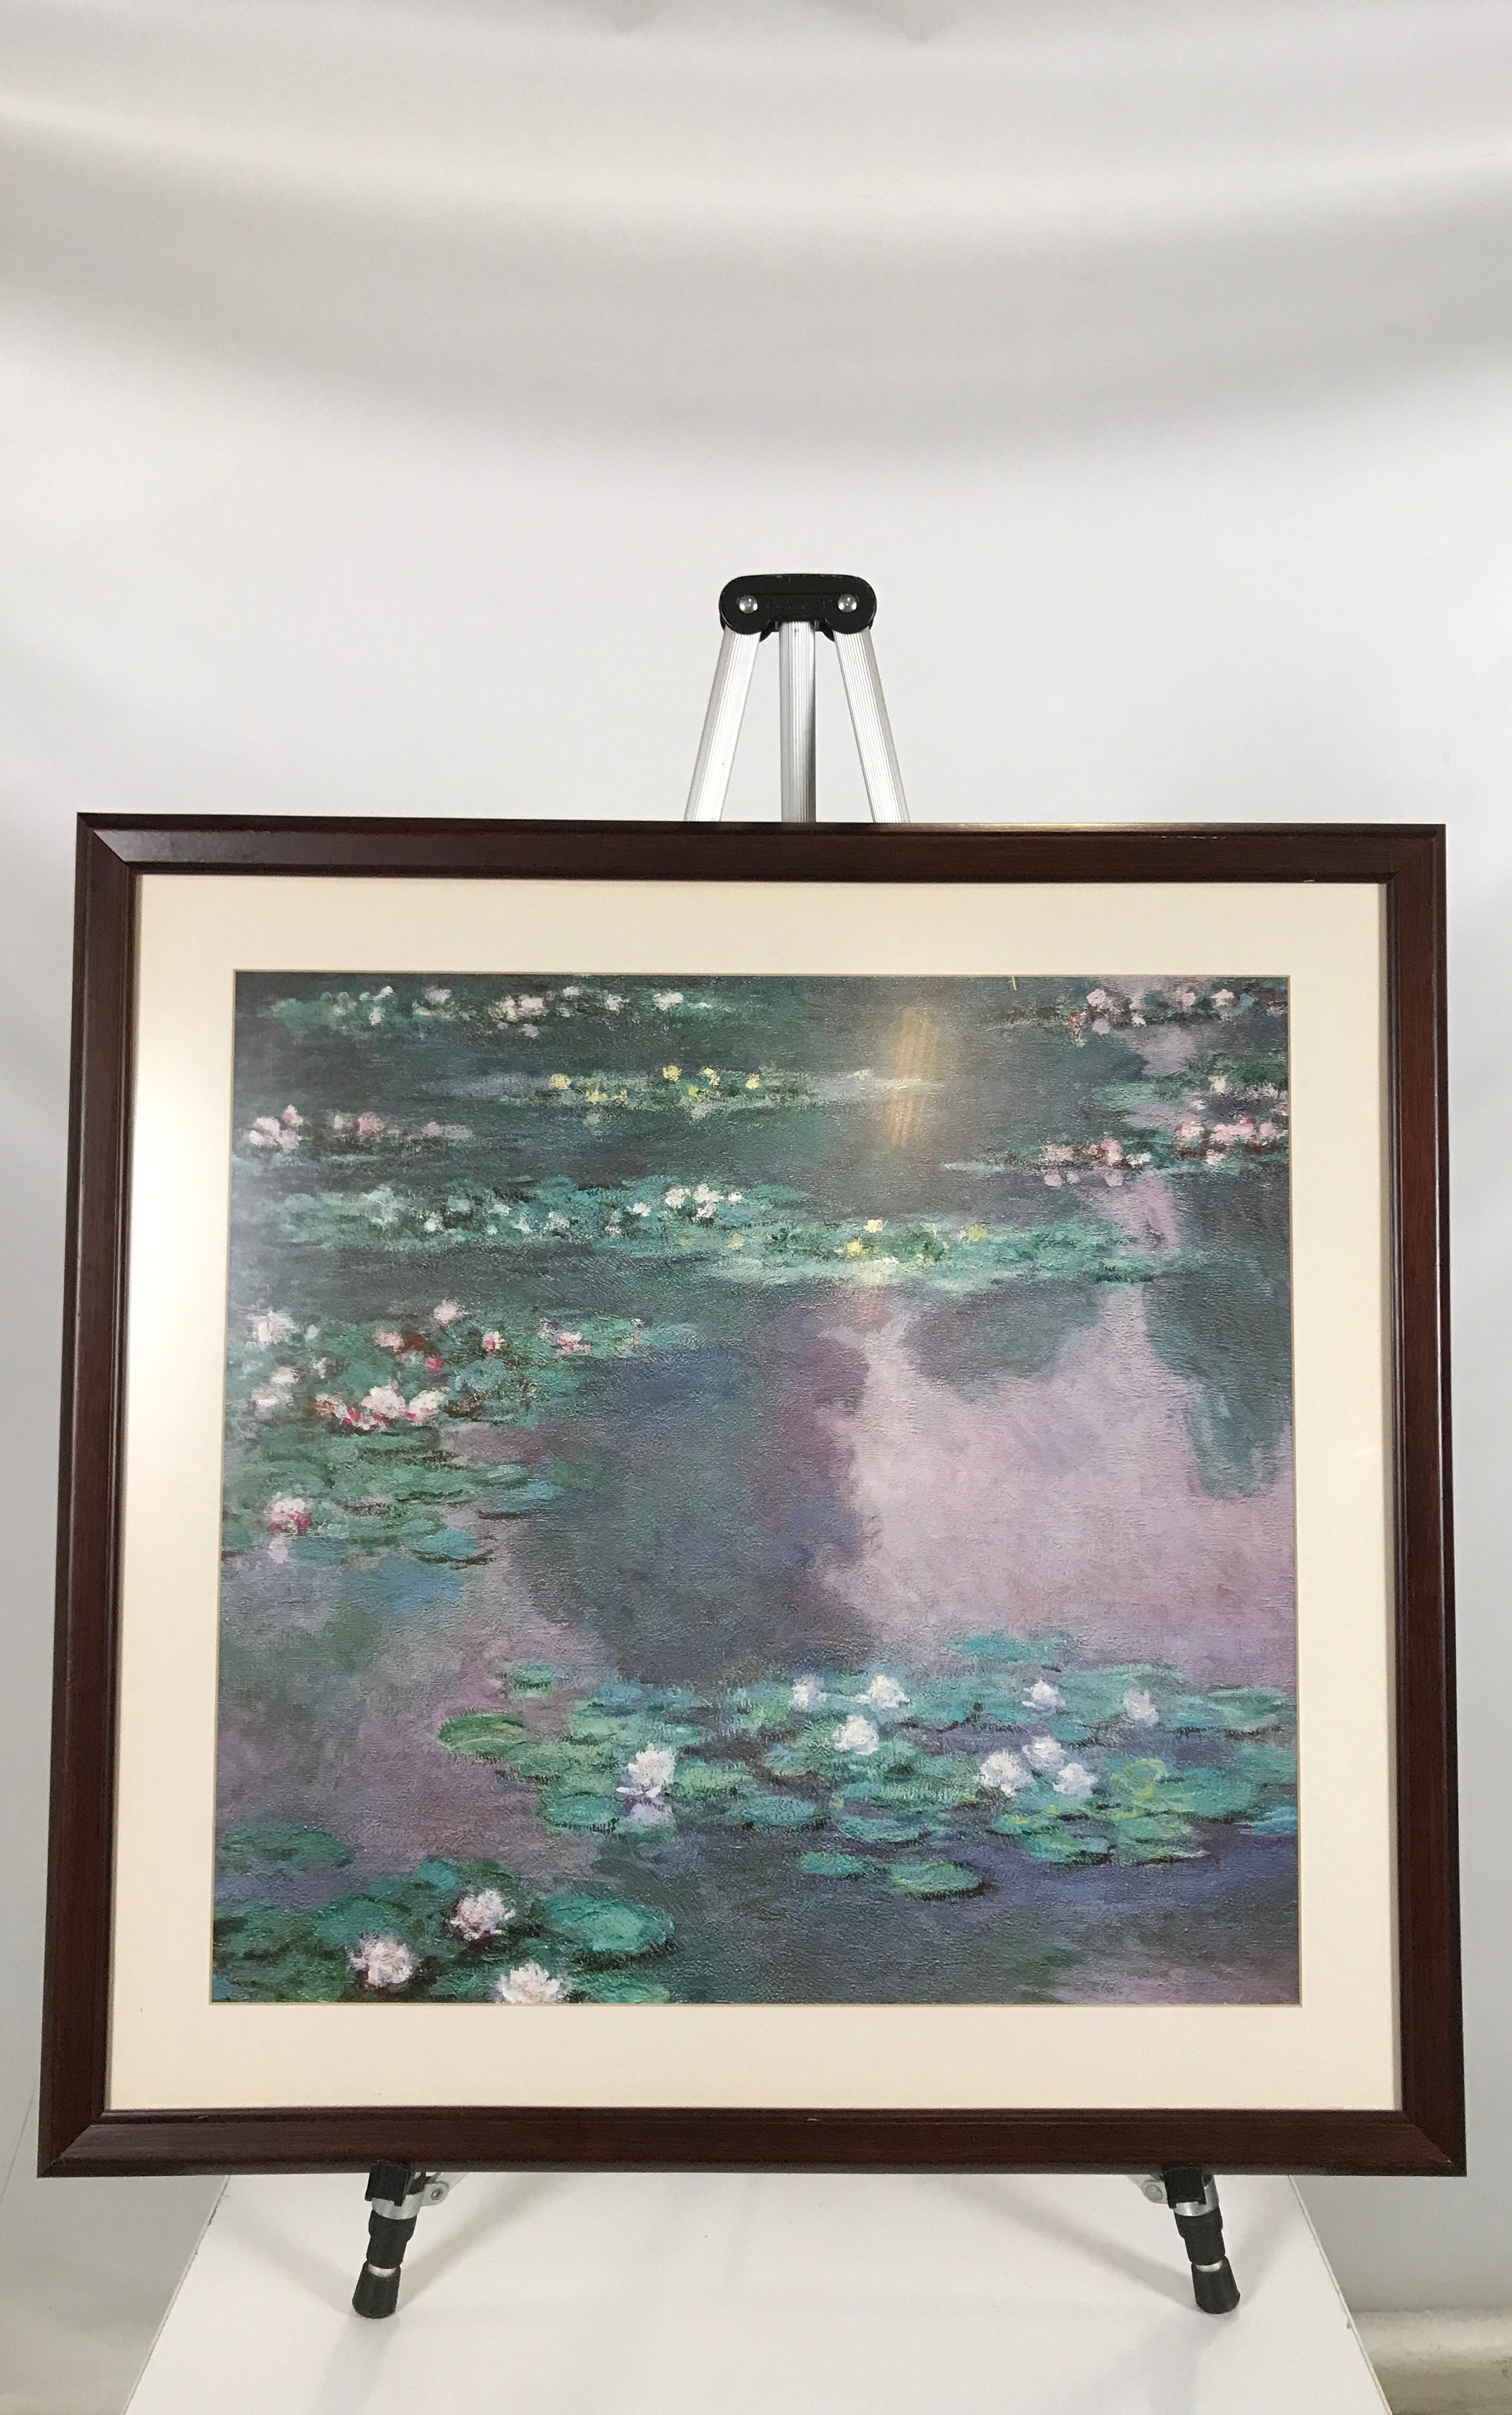 Lily Pads and Lotus Flowers Artwork